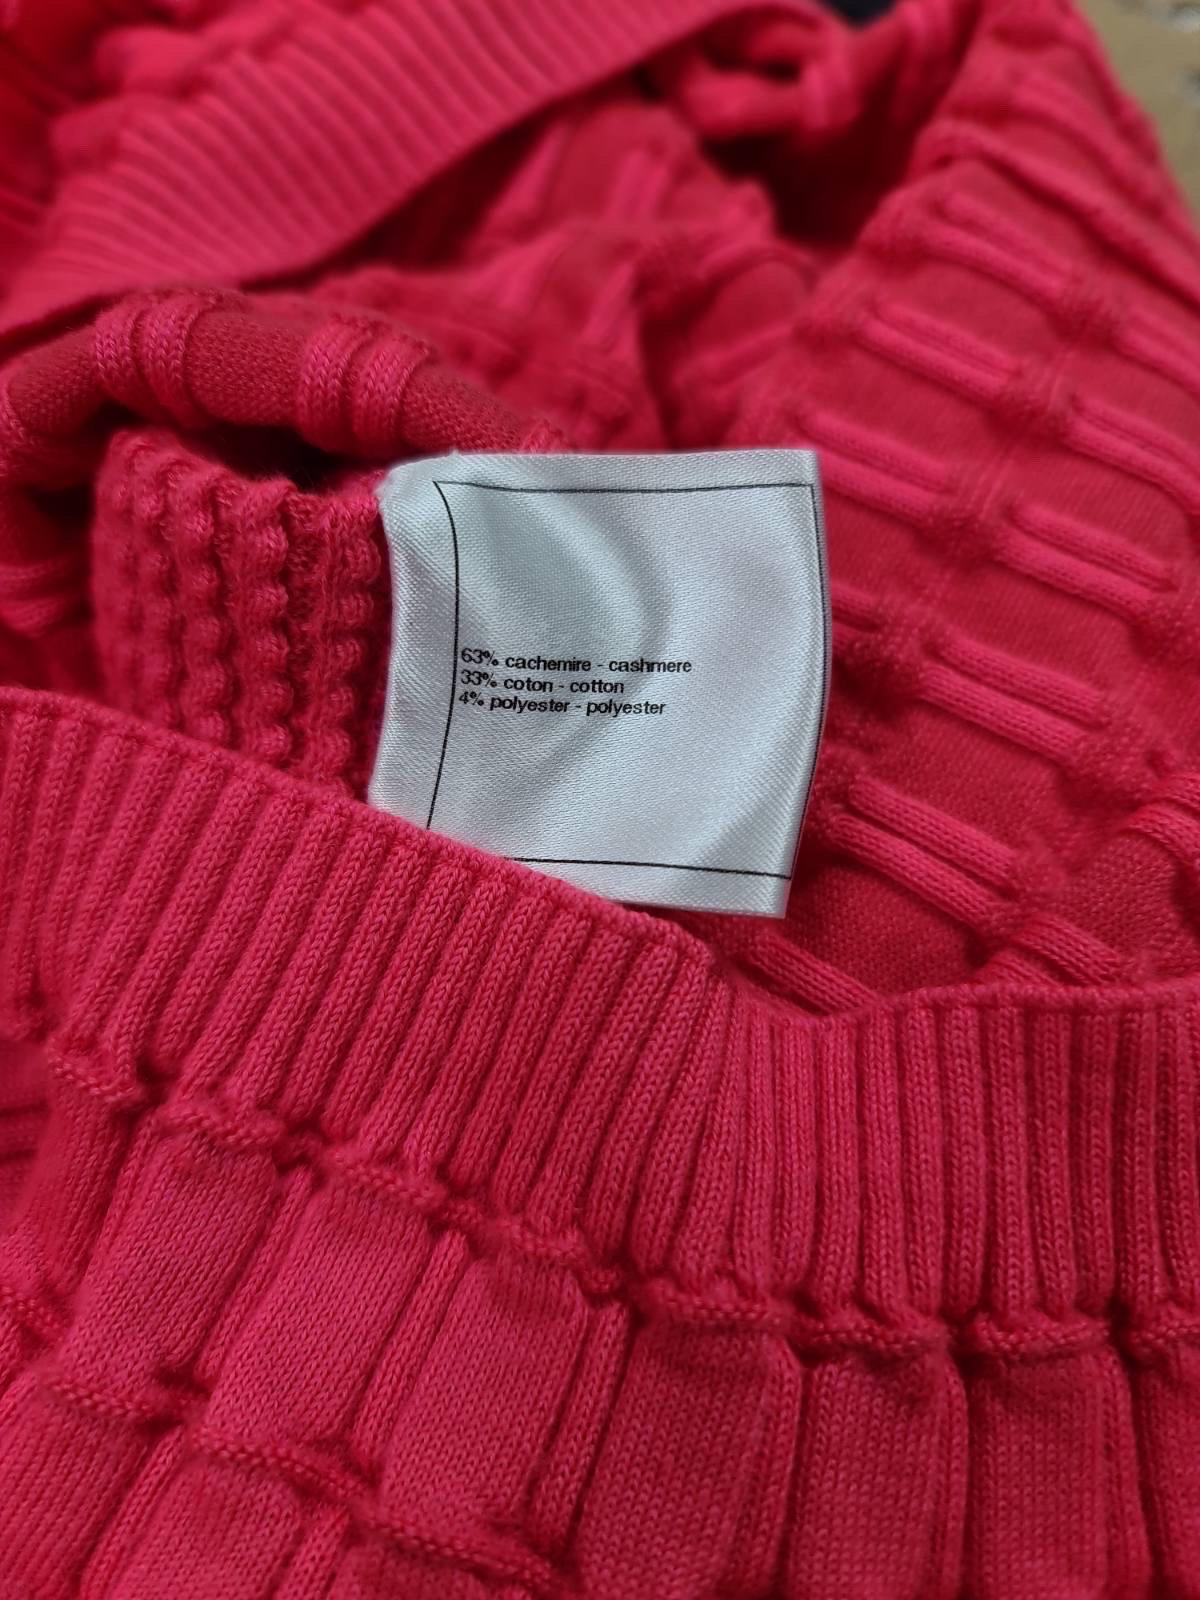 Chanel Dark Pink Mini Dress In Excellent Condition For Sale In Krakow, PL